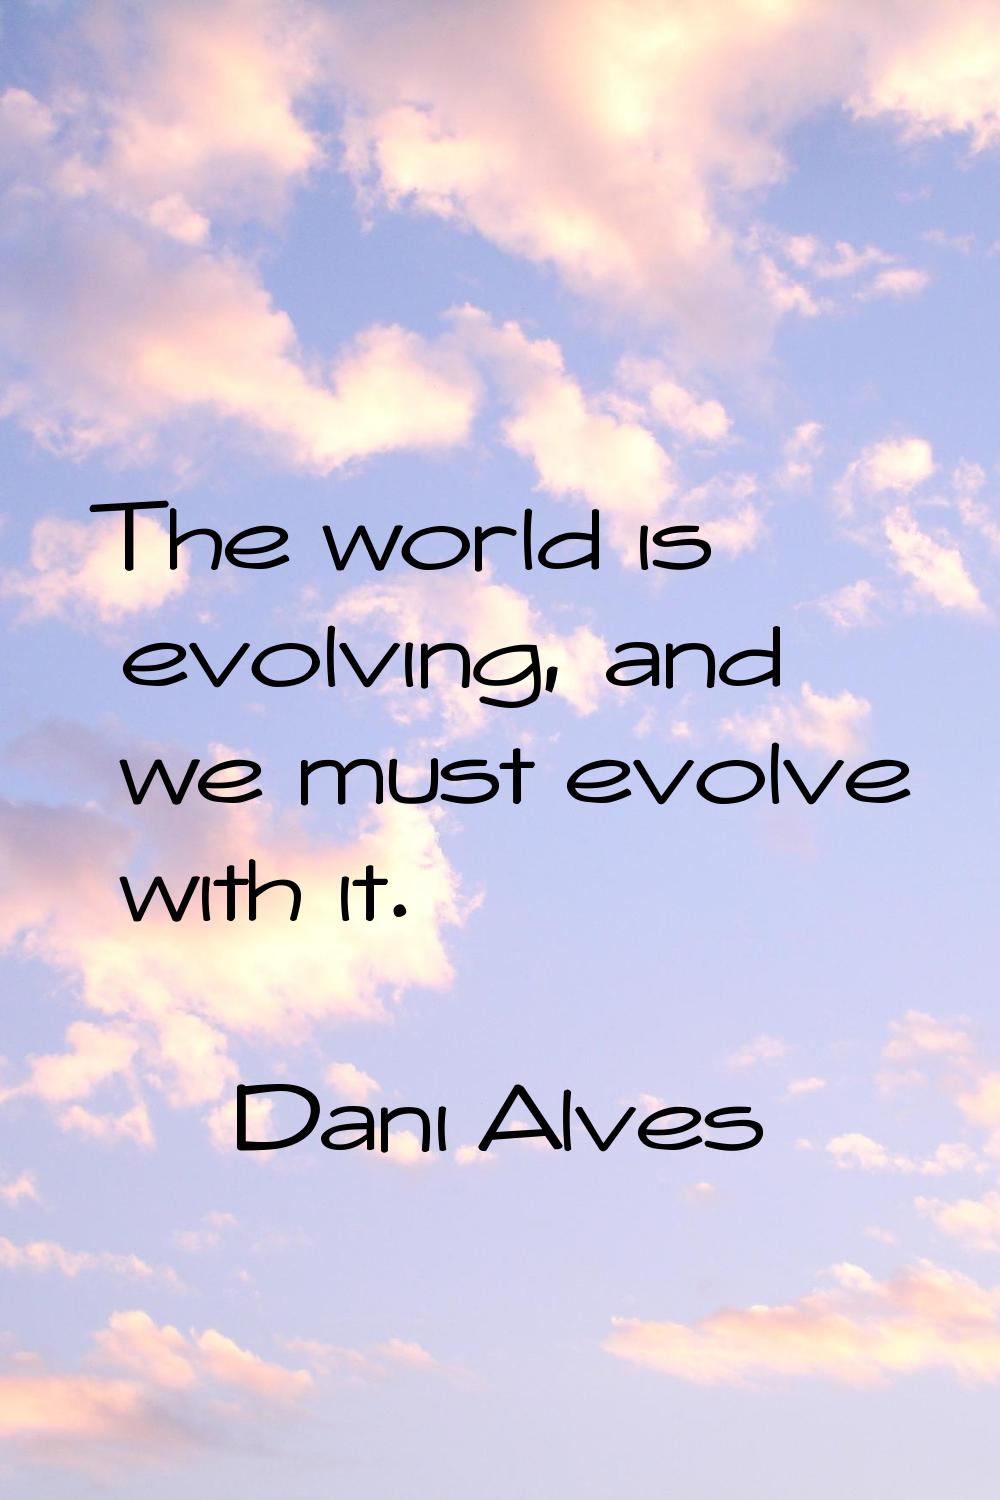 The world is evolving, and we must evolve with it.